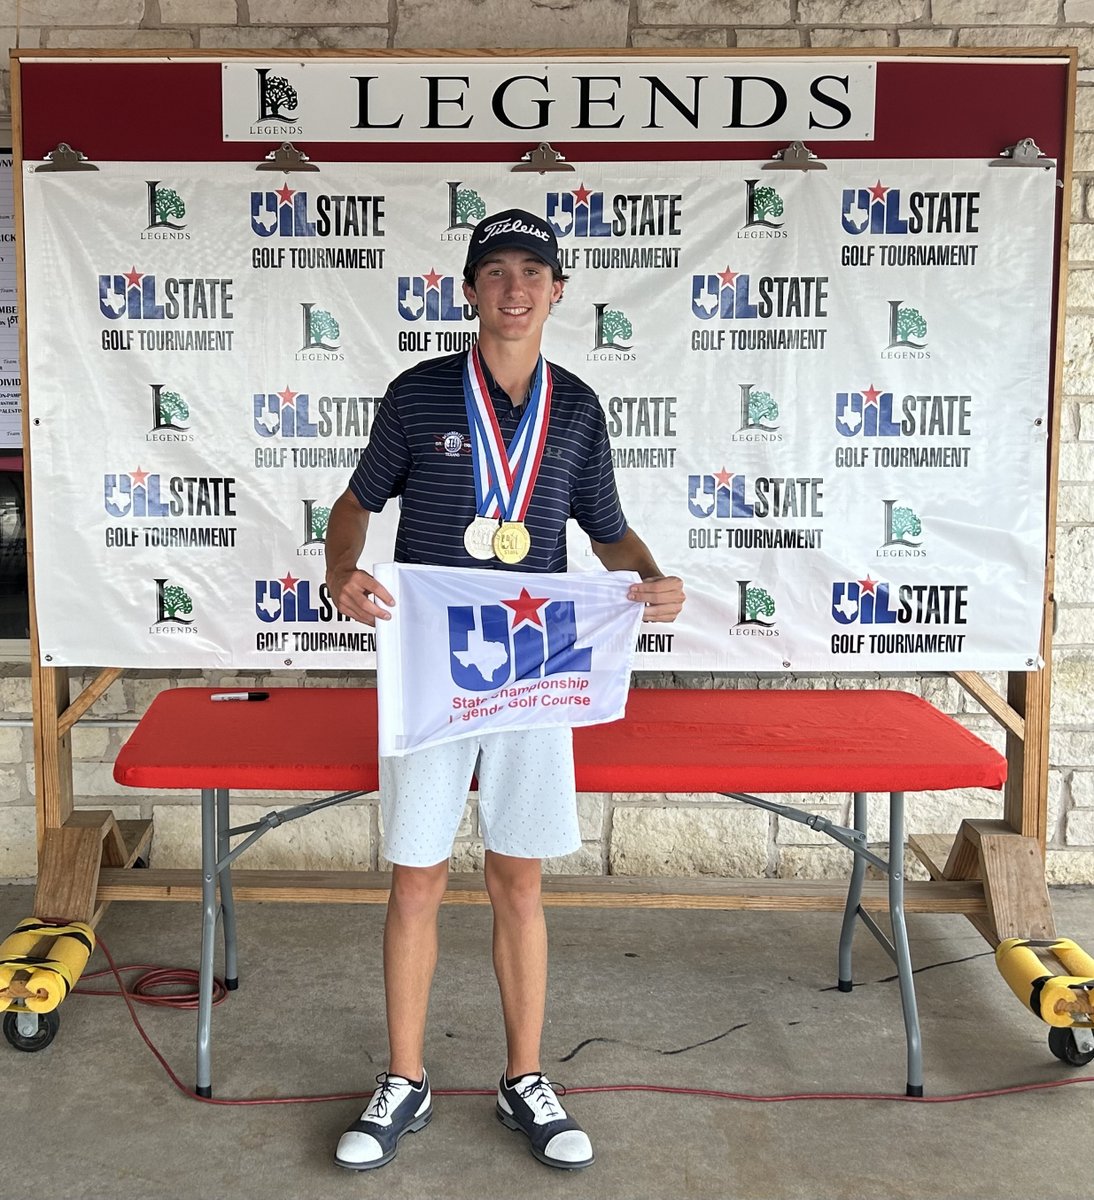 Jaxon Donaldson (Wimberley) is now a 3X state champ in Conf 4A #UILState Boys Golf. Congrats Jaxon!🥇